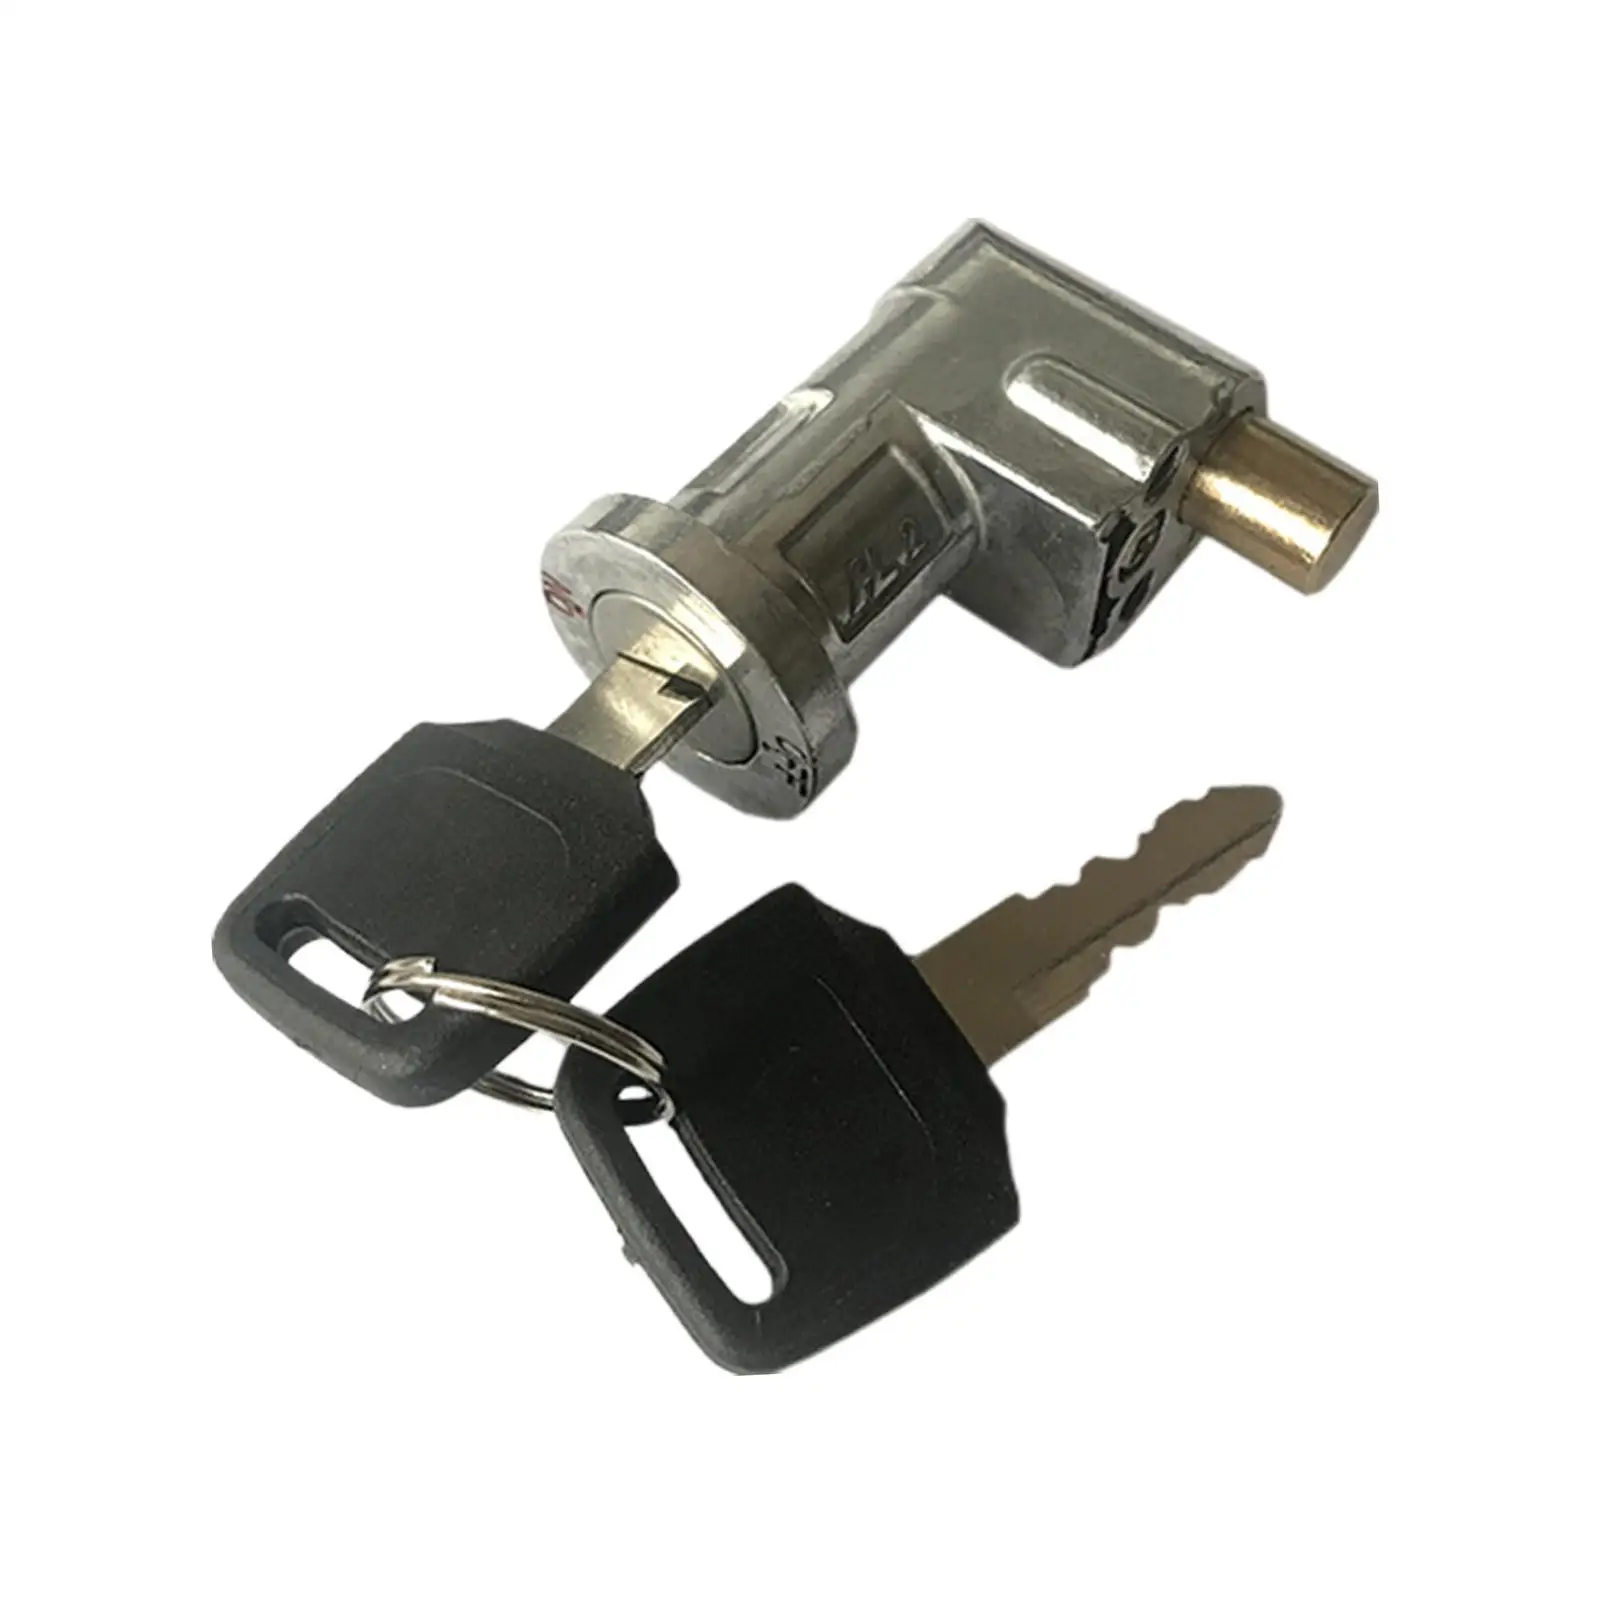 Battery Box Safety Lock Motorcycle Battery Locks Durable with 2 Keys Ignition Switch Battery Safety Lock for Electric Vehicle